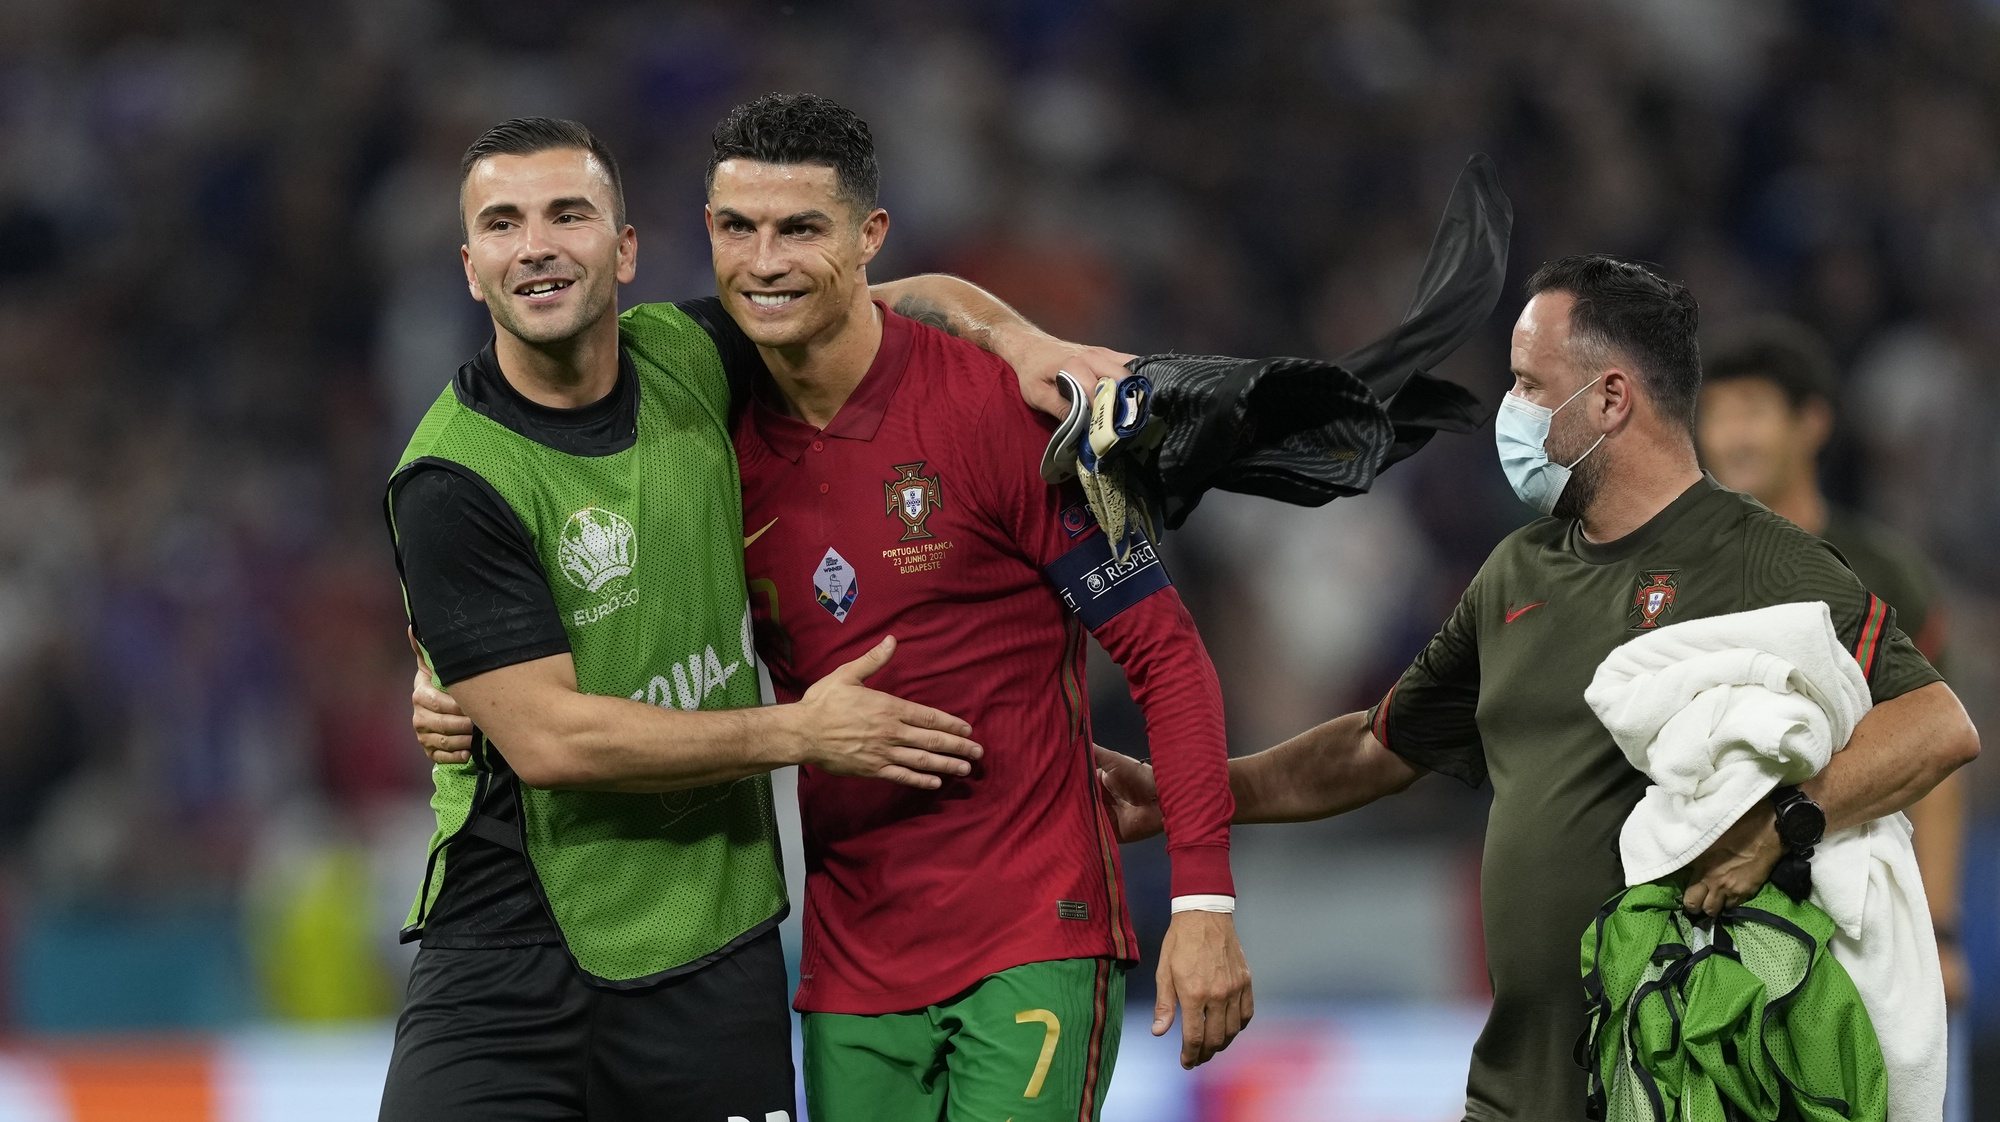 Portugal players Cristiano Ronaldo and Anthony Lopes celebrate after the UEFA EURO 2020 group F preliminary round soccer match between Portugal and France in Budapest, Hungary, 23 June 2021. HUGO DELGADO/LUSA